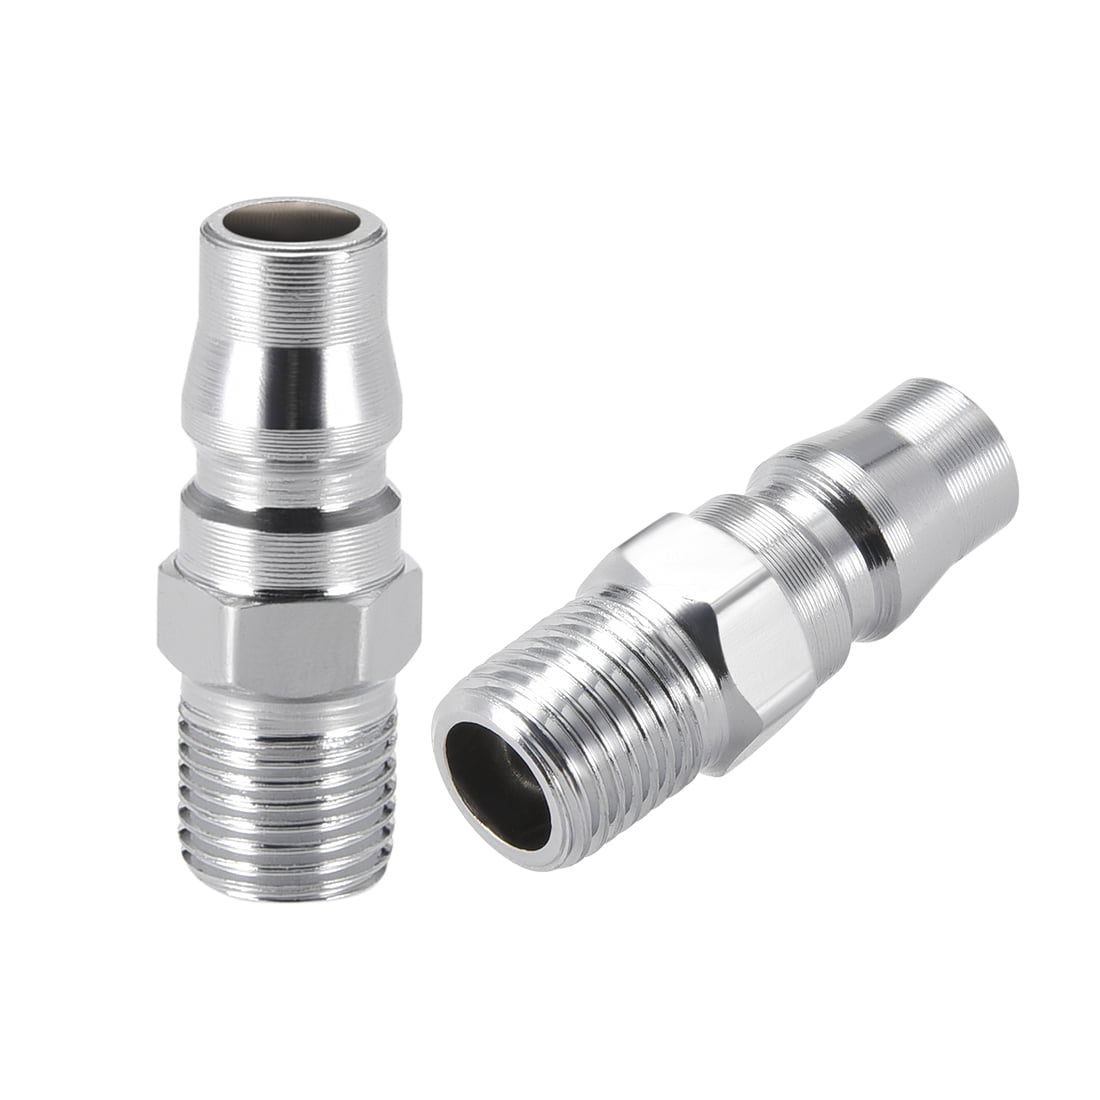 Mosmatic Live Pressure Washer Swivel 4000 PSI NPT-M 3/8In Stainless Steel, 